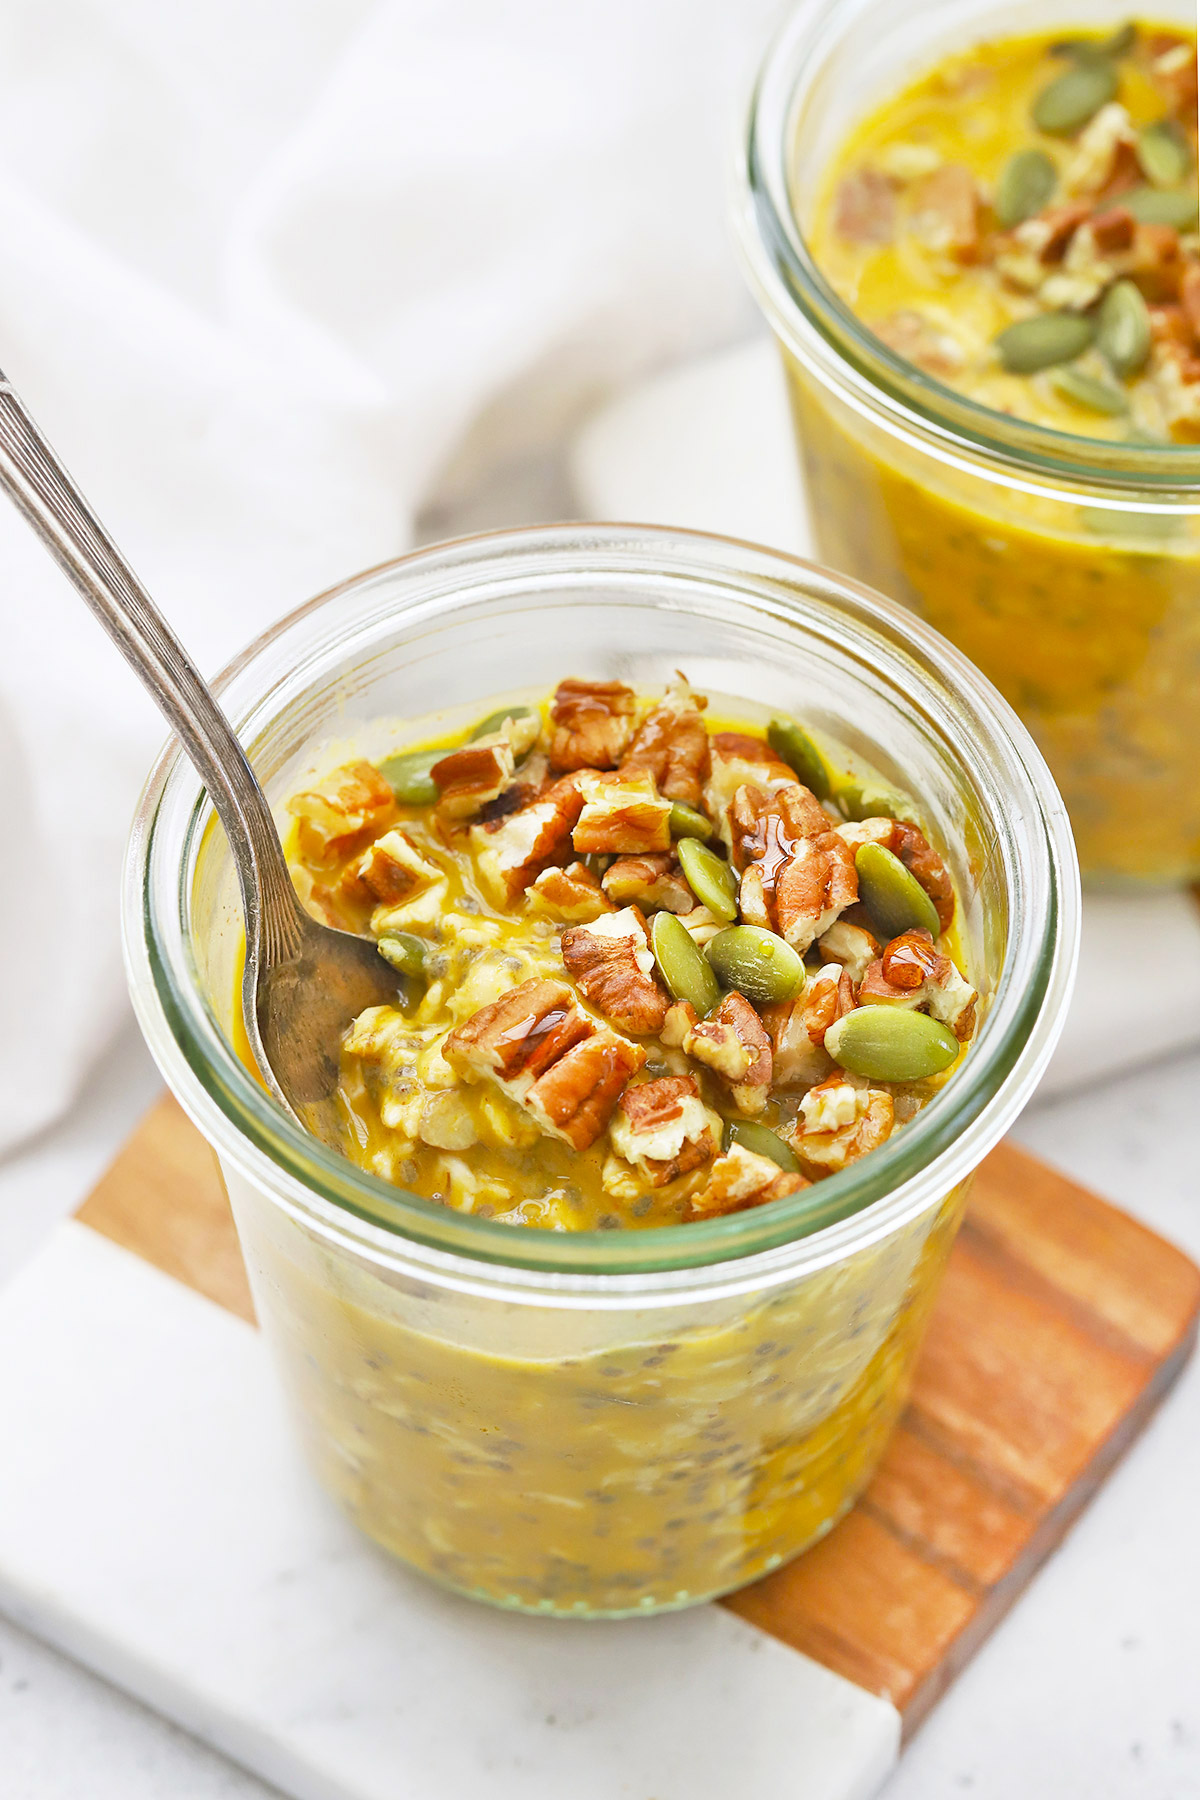 Spoon dipped into a jar of Pumpkin Pie Overnight Oats topped with pecans and pumpkin seeds